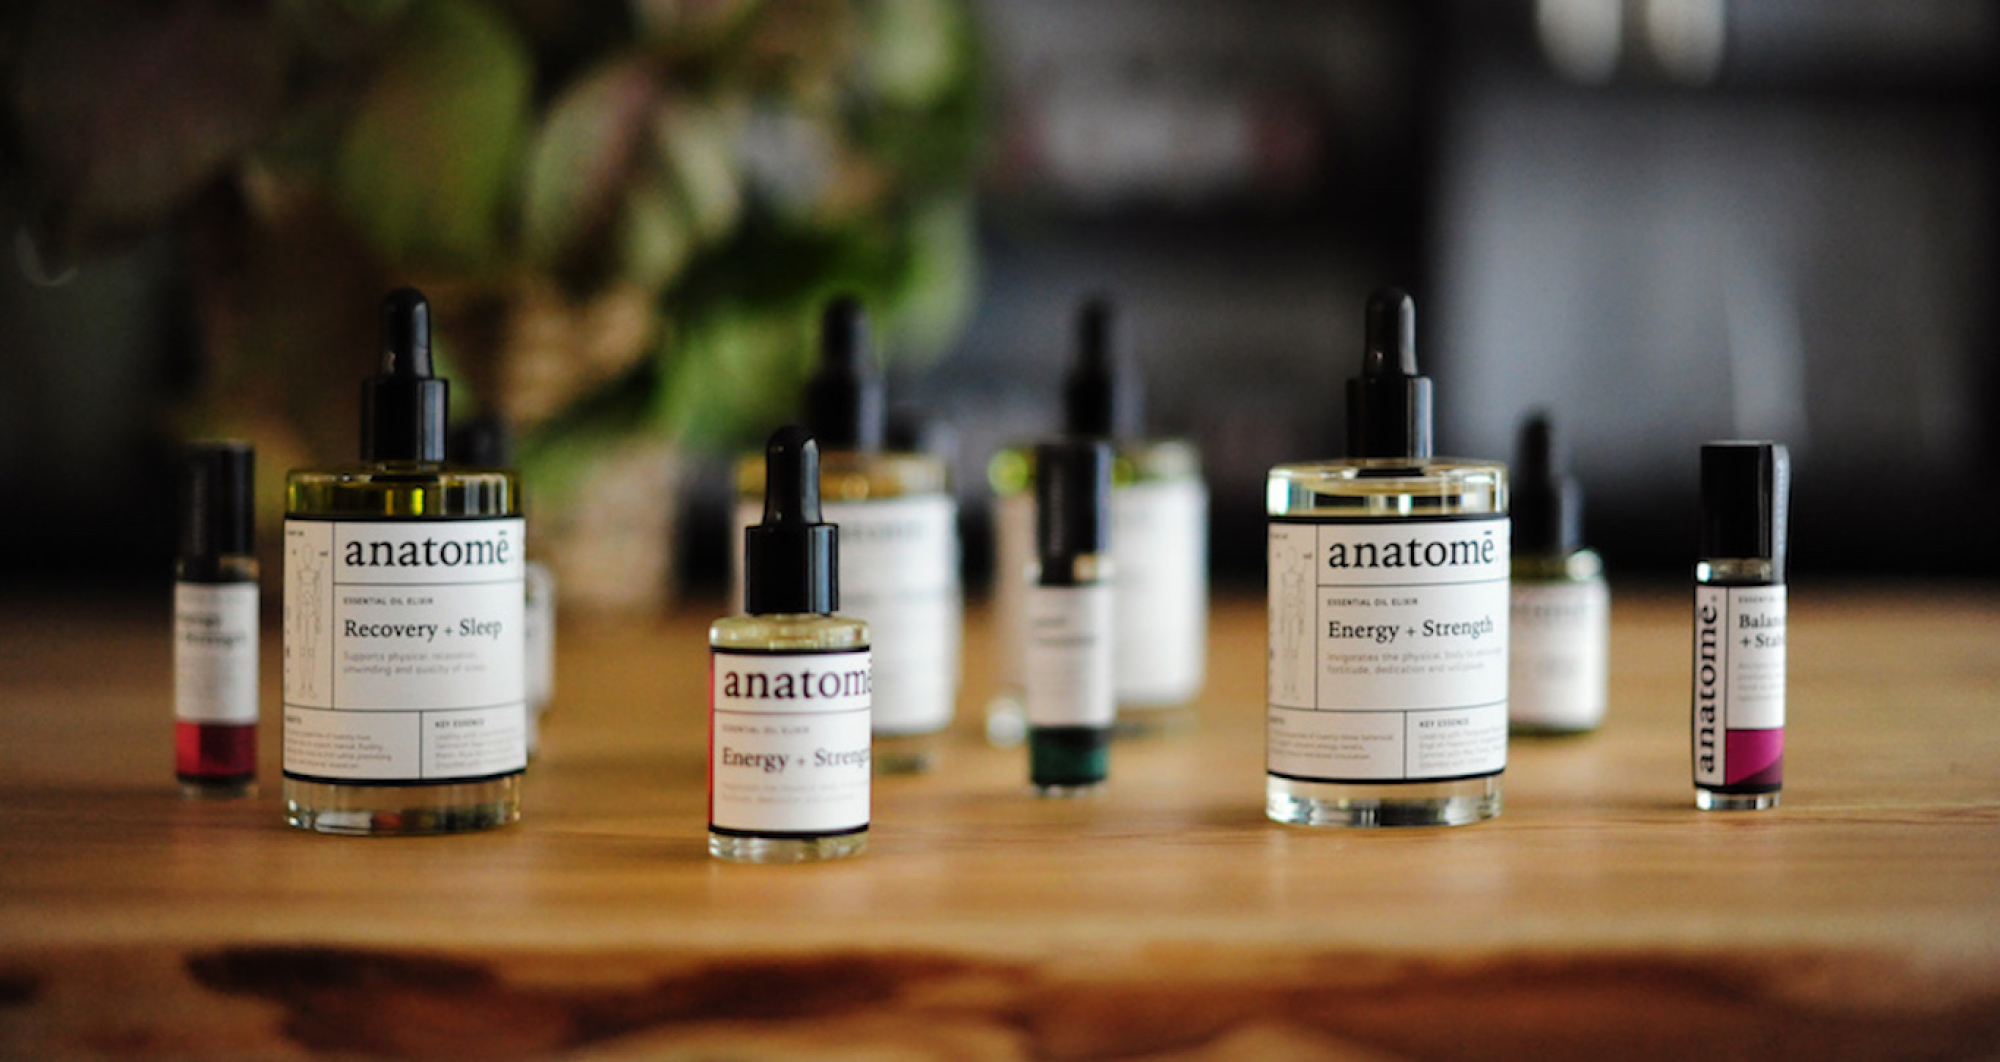 Anatomē is a London apothecary brand offering organic skincare, essential oils and dietary supplements